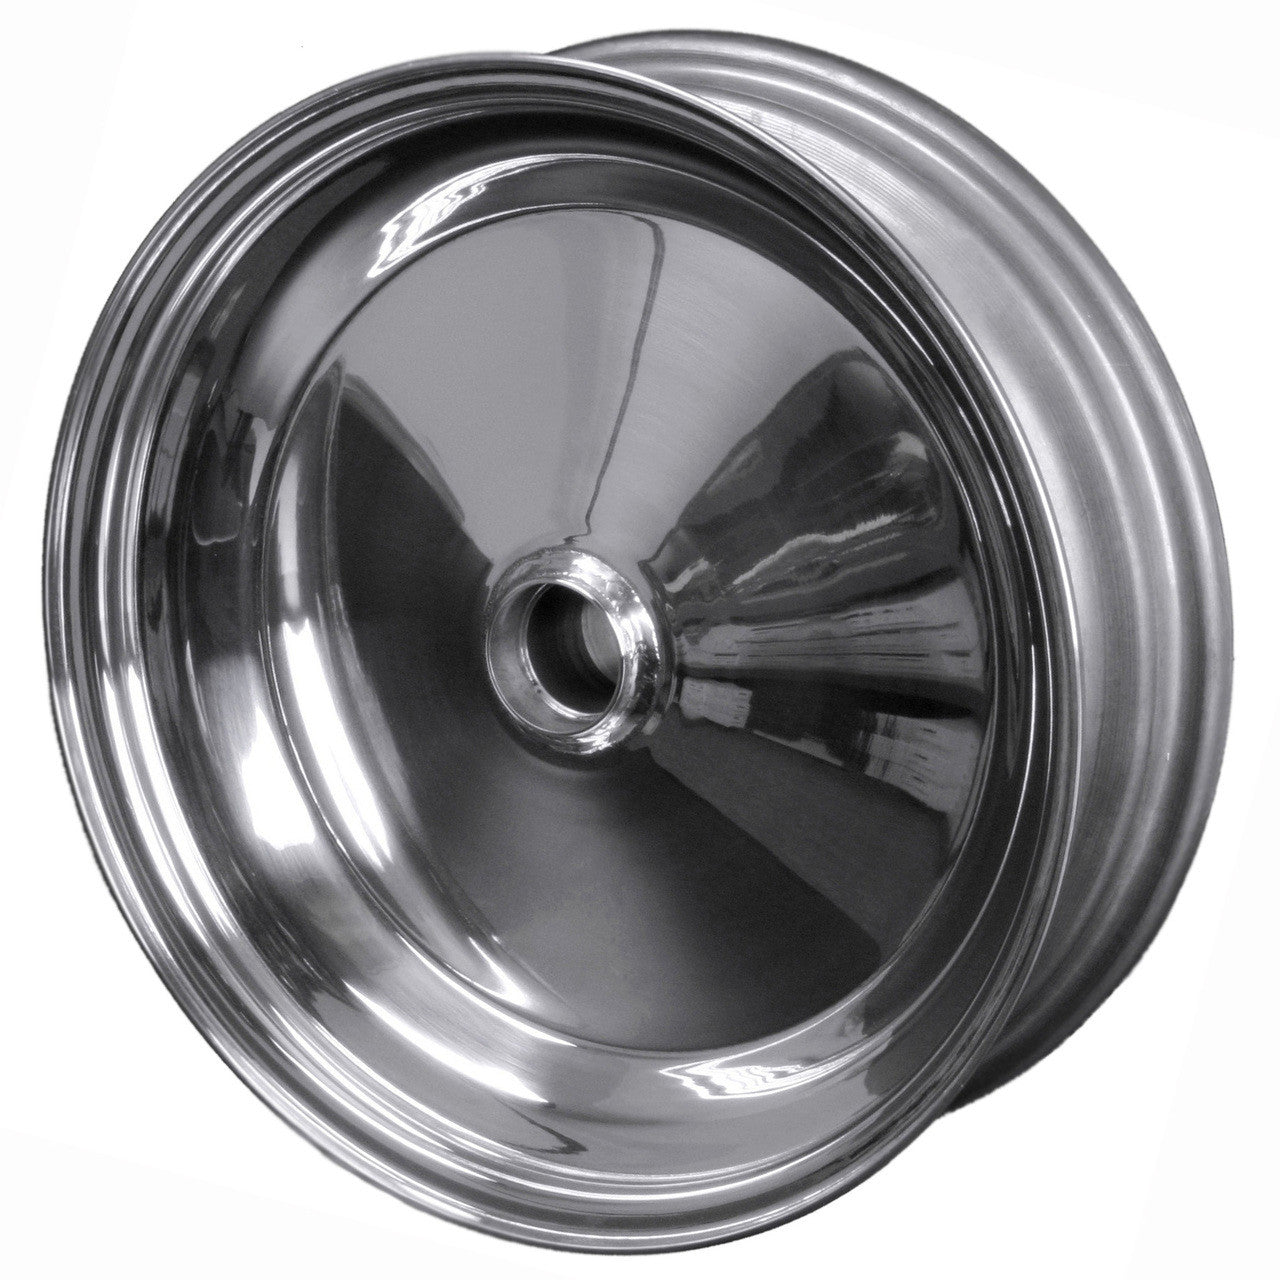 Latest Rage Solid Aluminum Spindle Mount Wheel, Vw King Pin 15" X 4". Pair